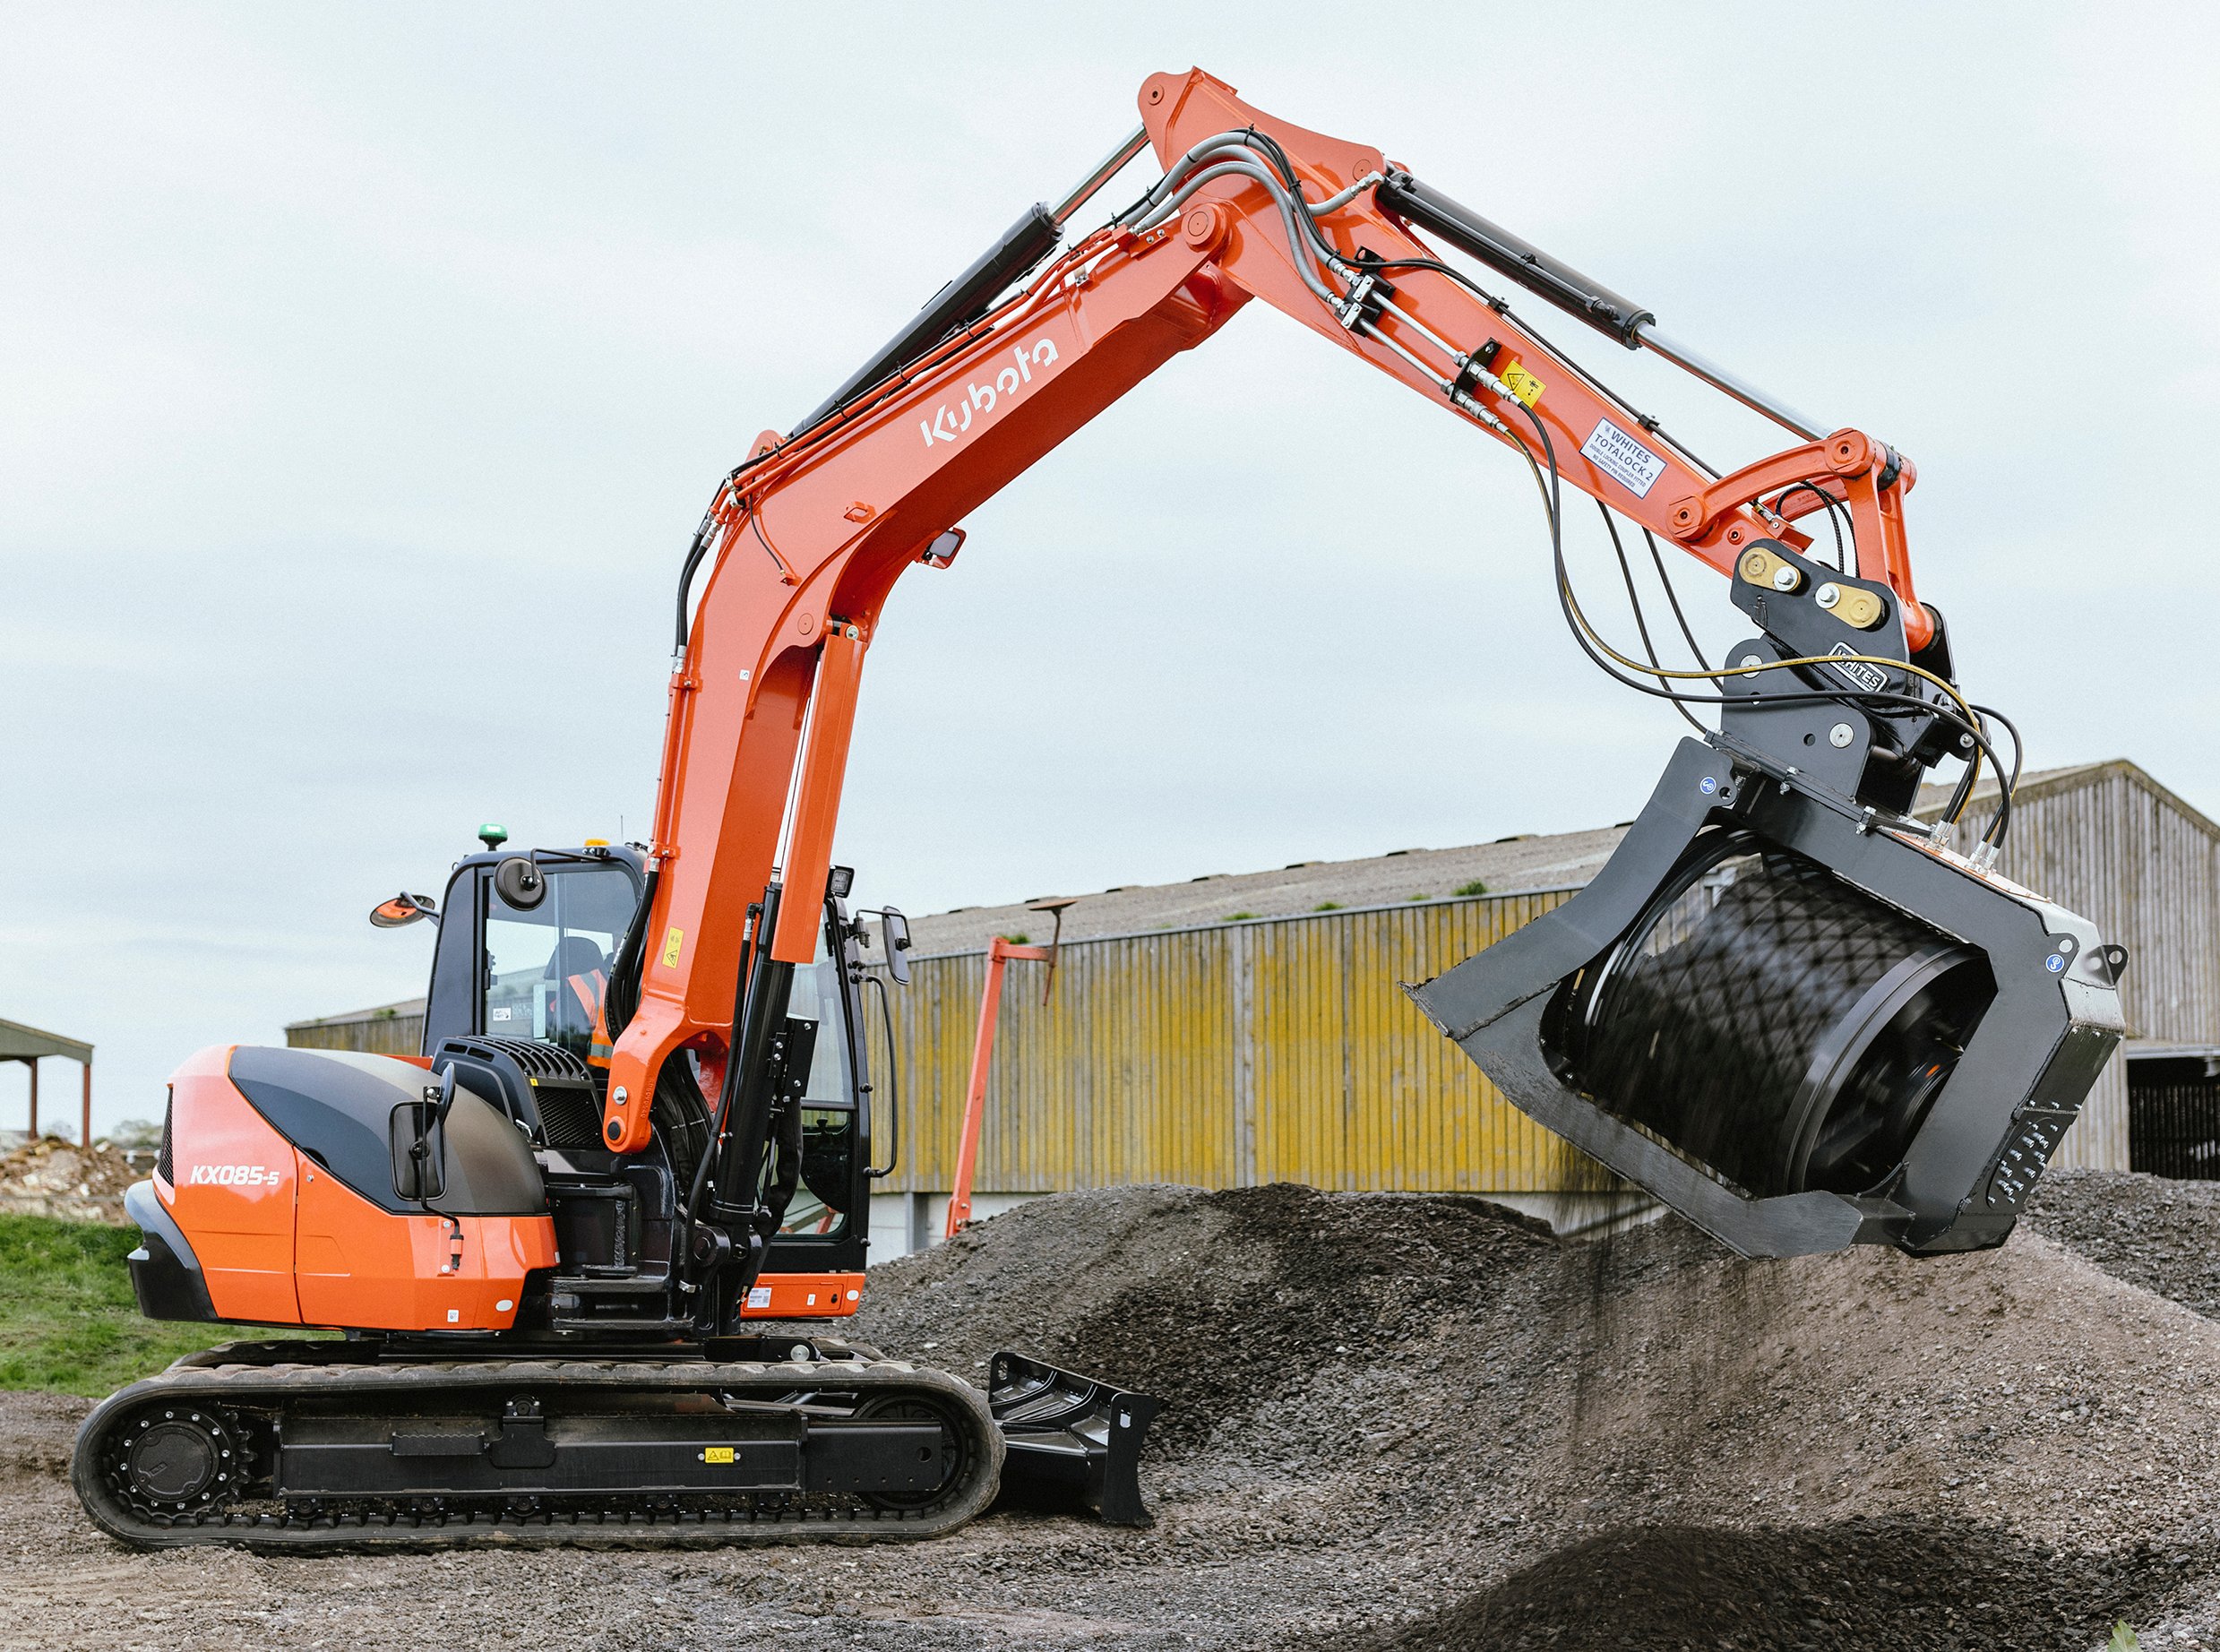 Gum Drejning om forladelse New Mini Excavator Enter Kubota Family: the 8.5 tonne Hydraulic Model is  the Right Tool to Operate in Restricted Spaces | The HeavyQuip Magazine